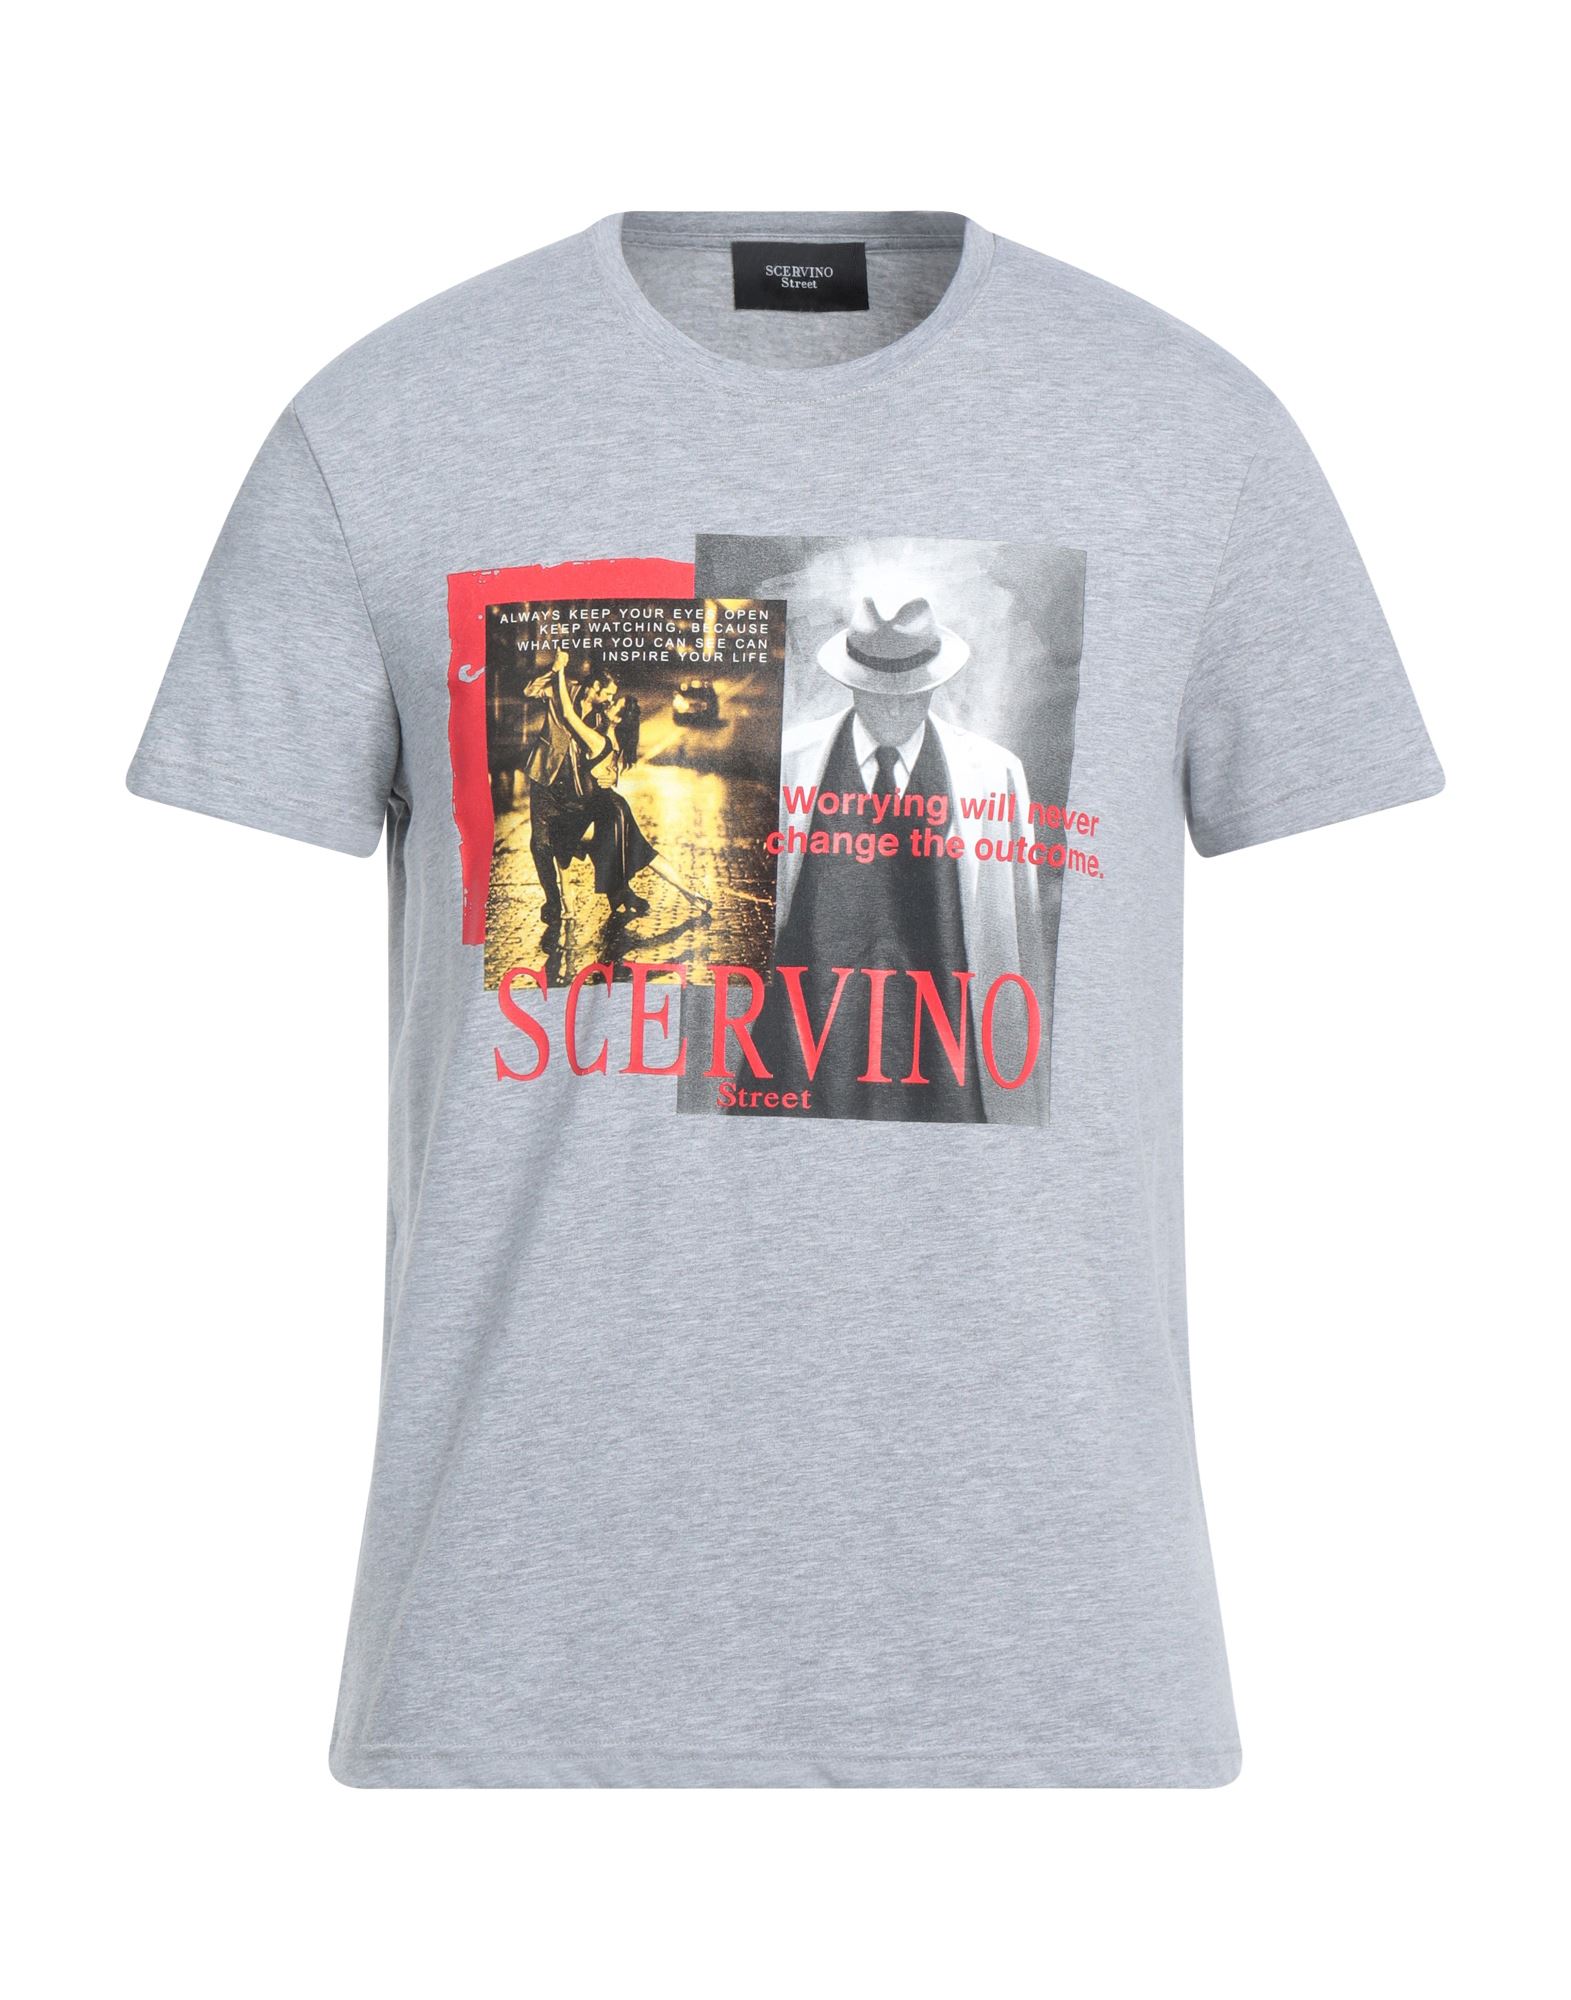 Scervino T-shirts In Grey